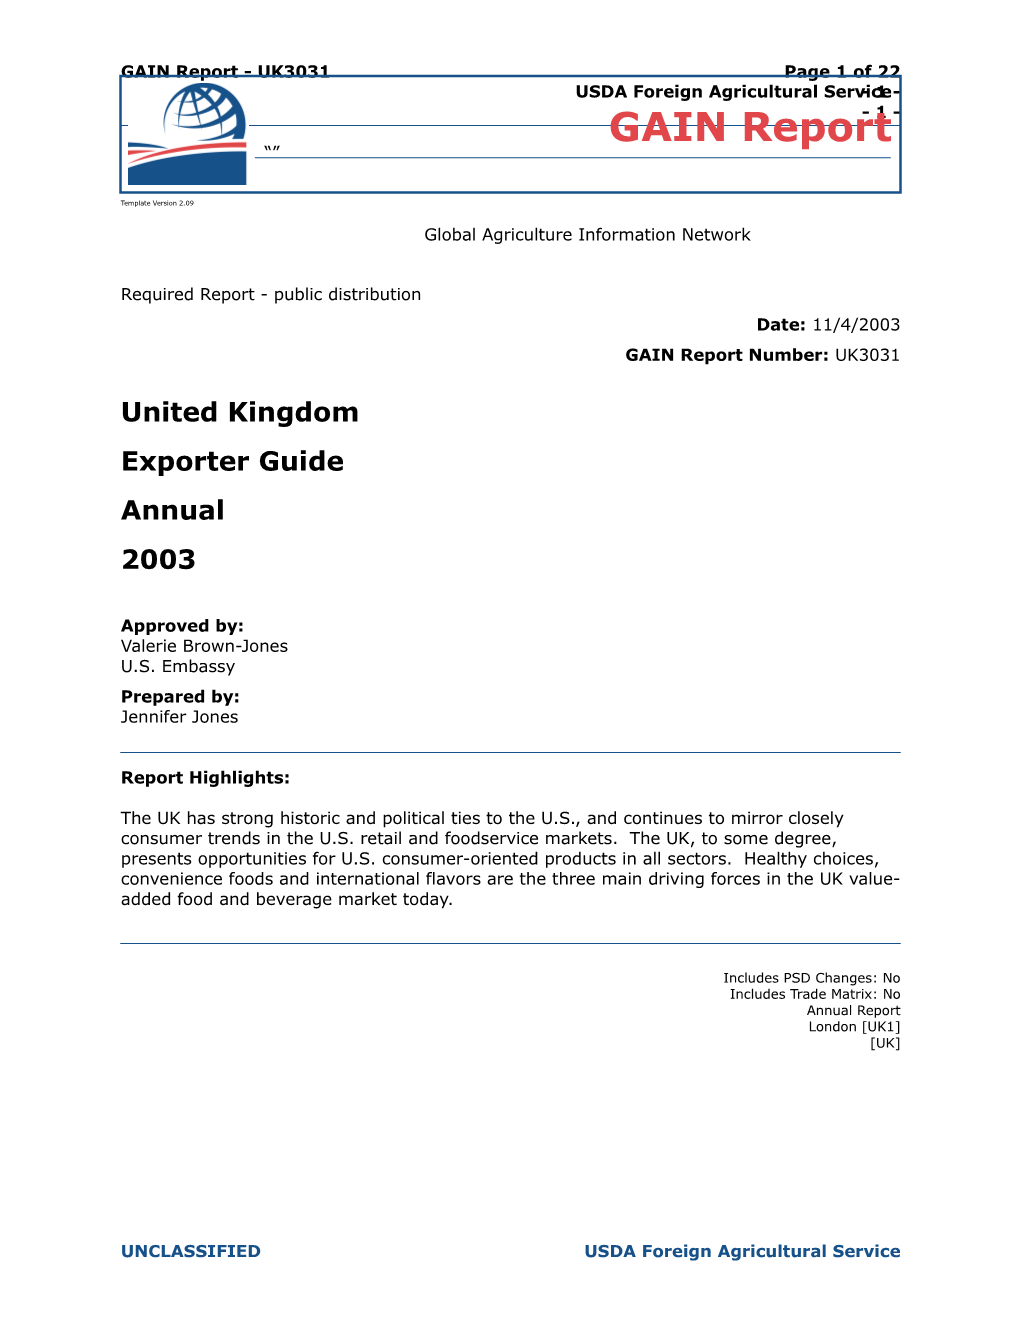 GAIN Report - Uk3031page 1 of 18 - 1 - - 1